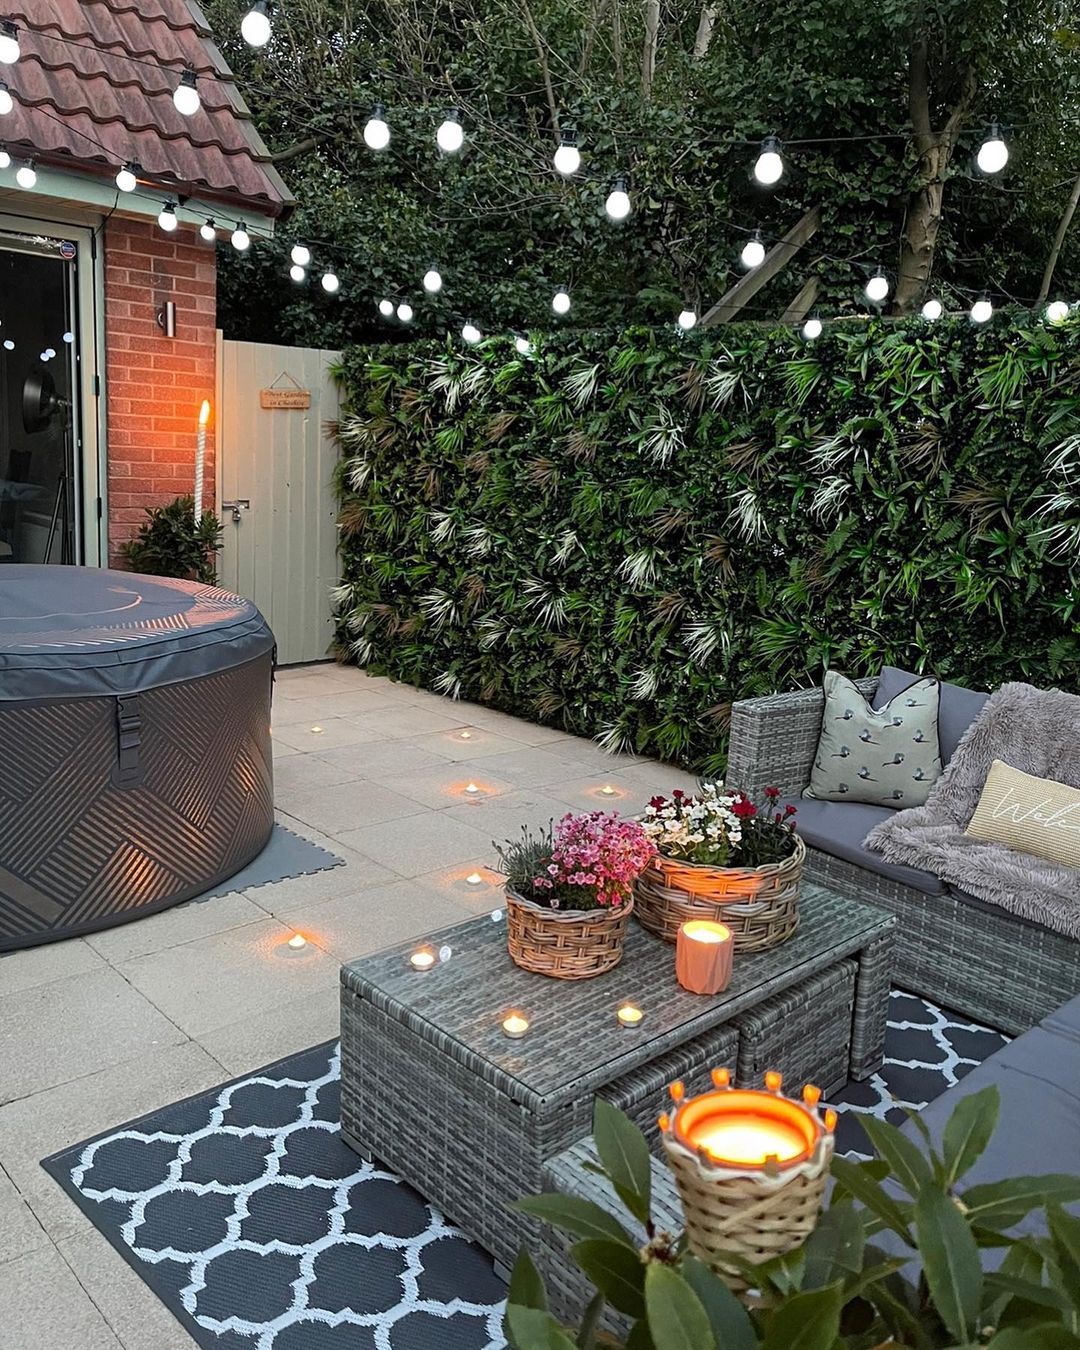 Backyard Sitting Area on a Patio with Lots of Lights Overhead. Photo by Instagram user @no1_home_decor